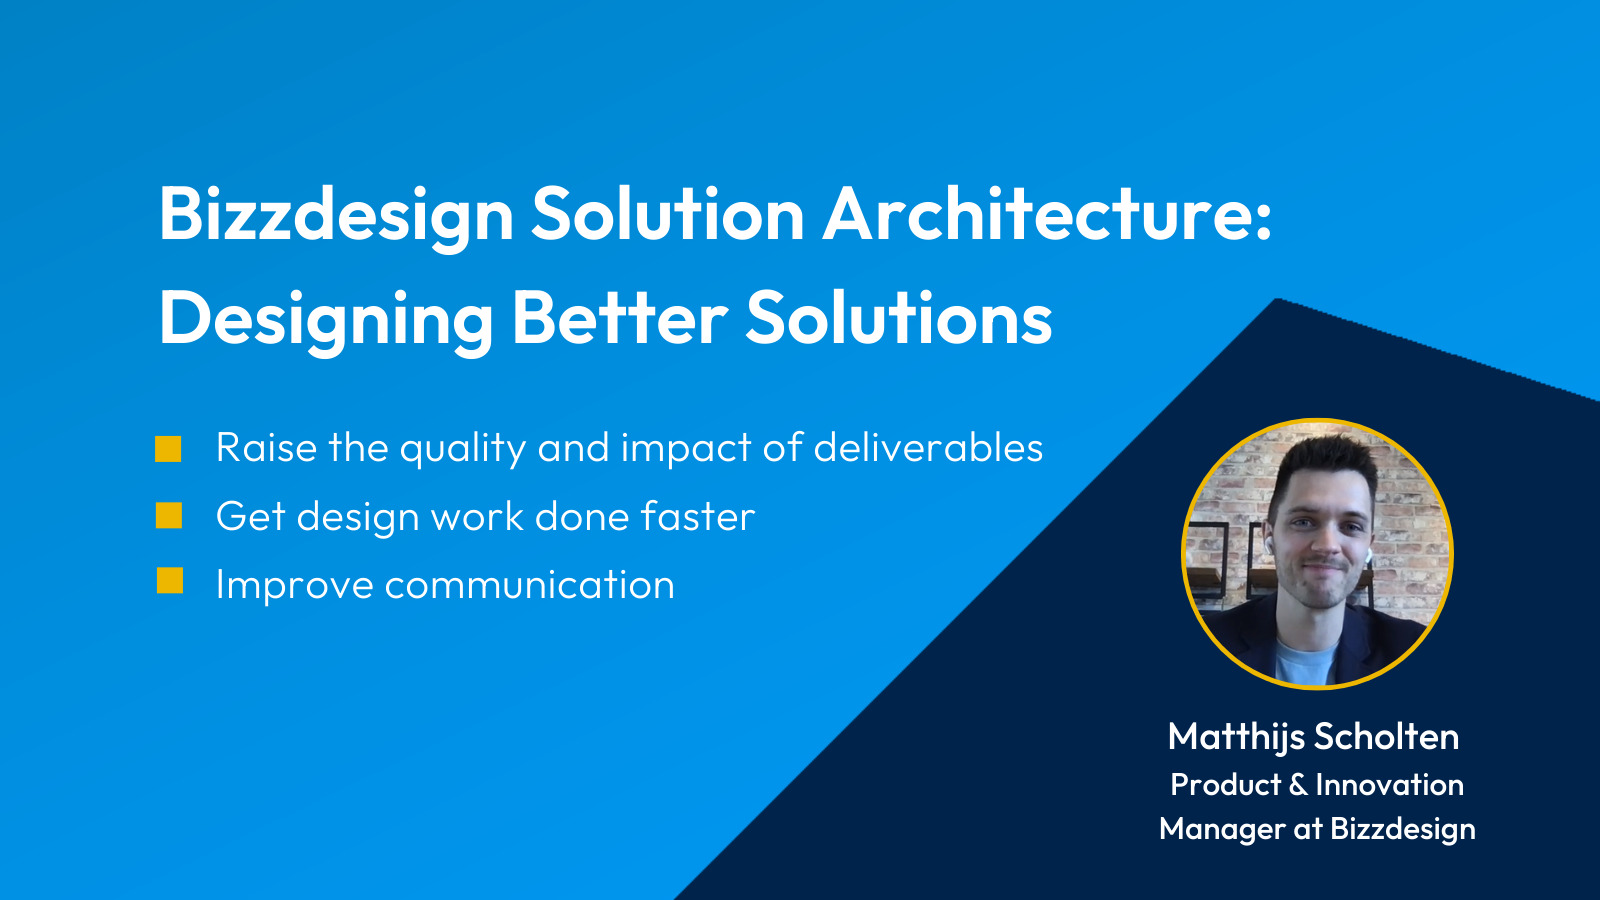 Bizzdesign Solution Architecture: Designing Better Solutions